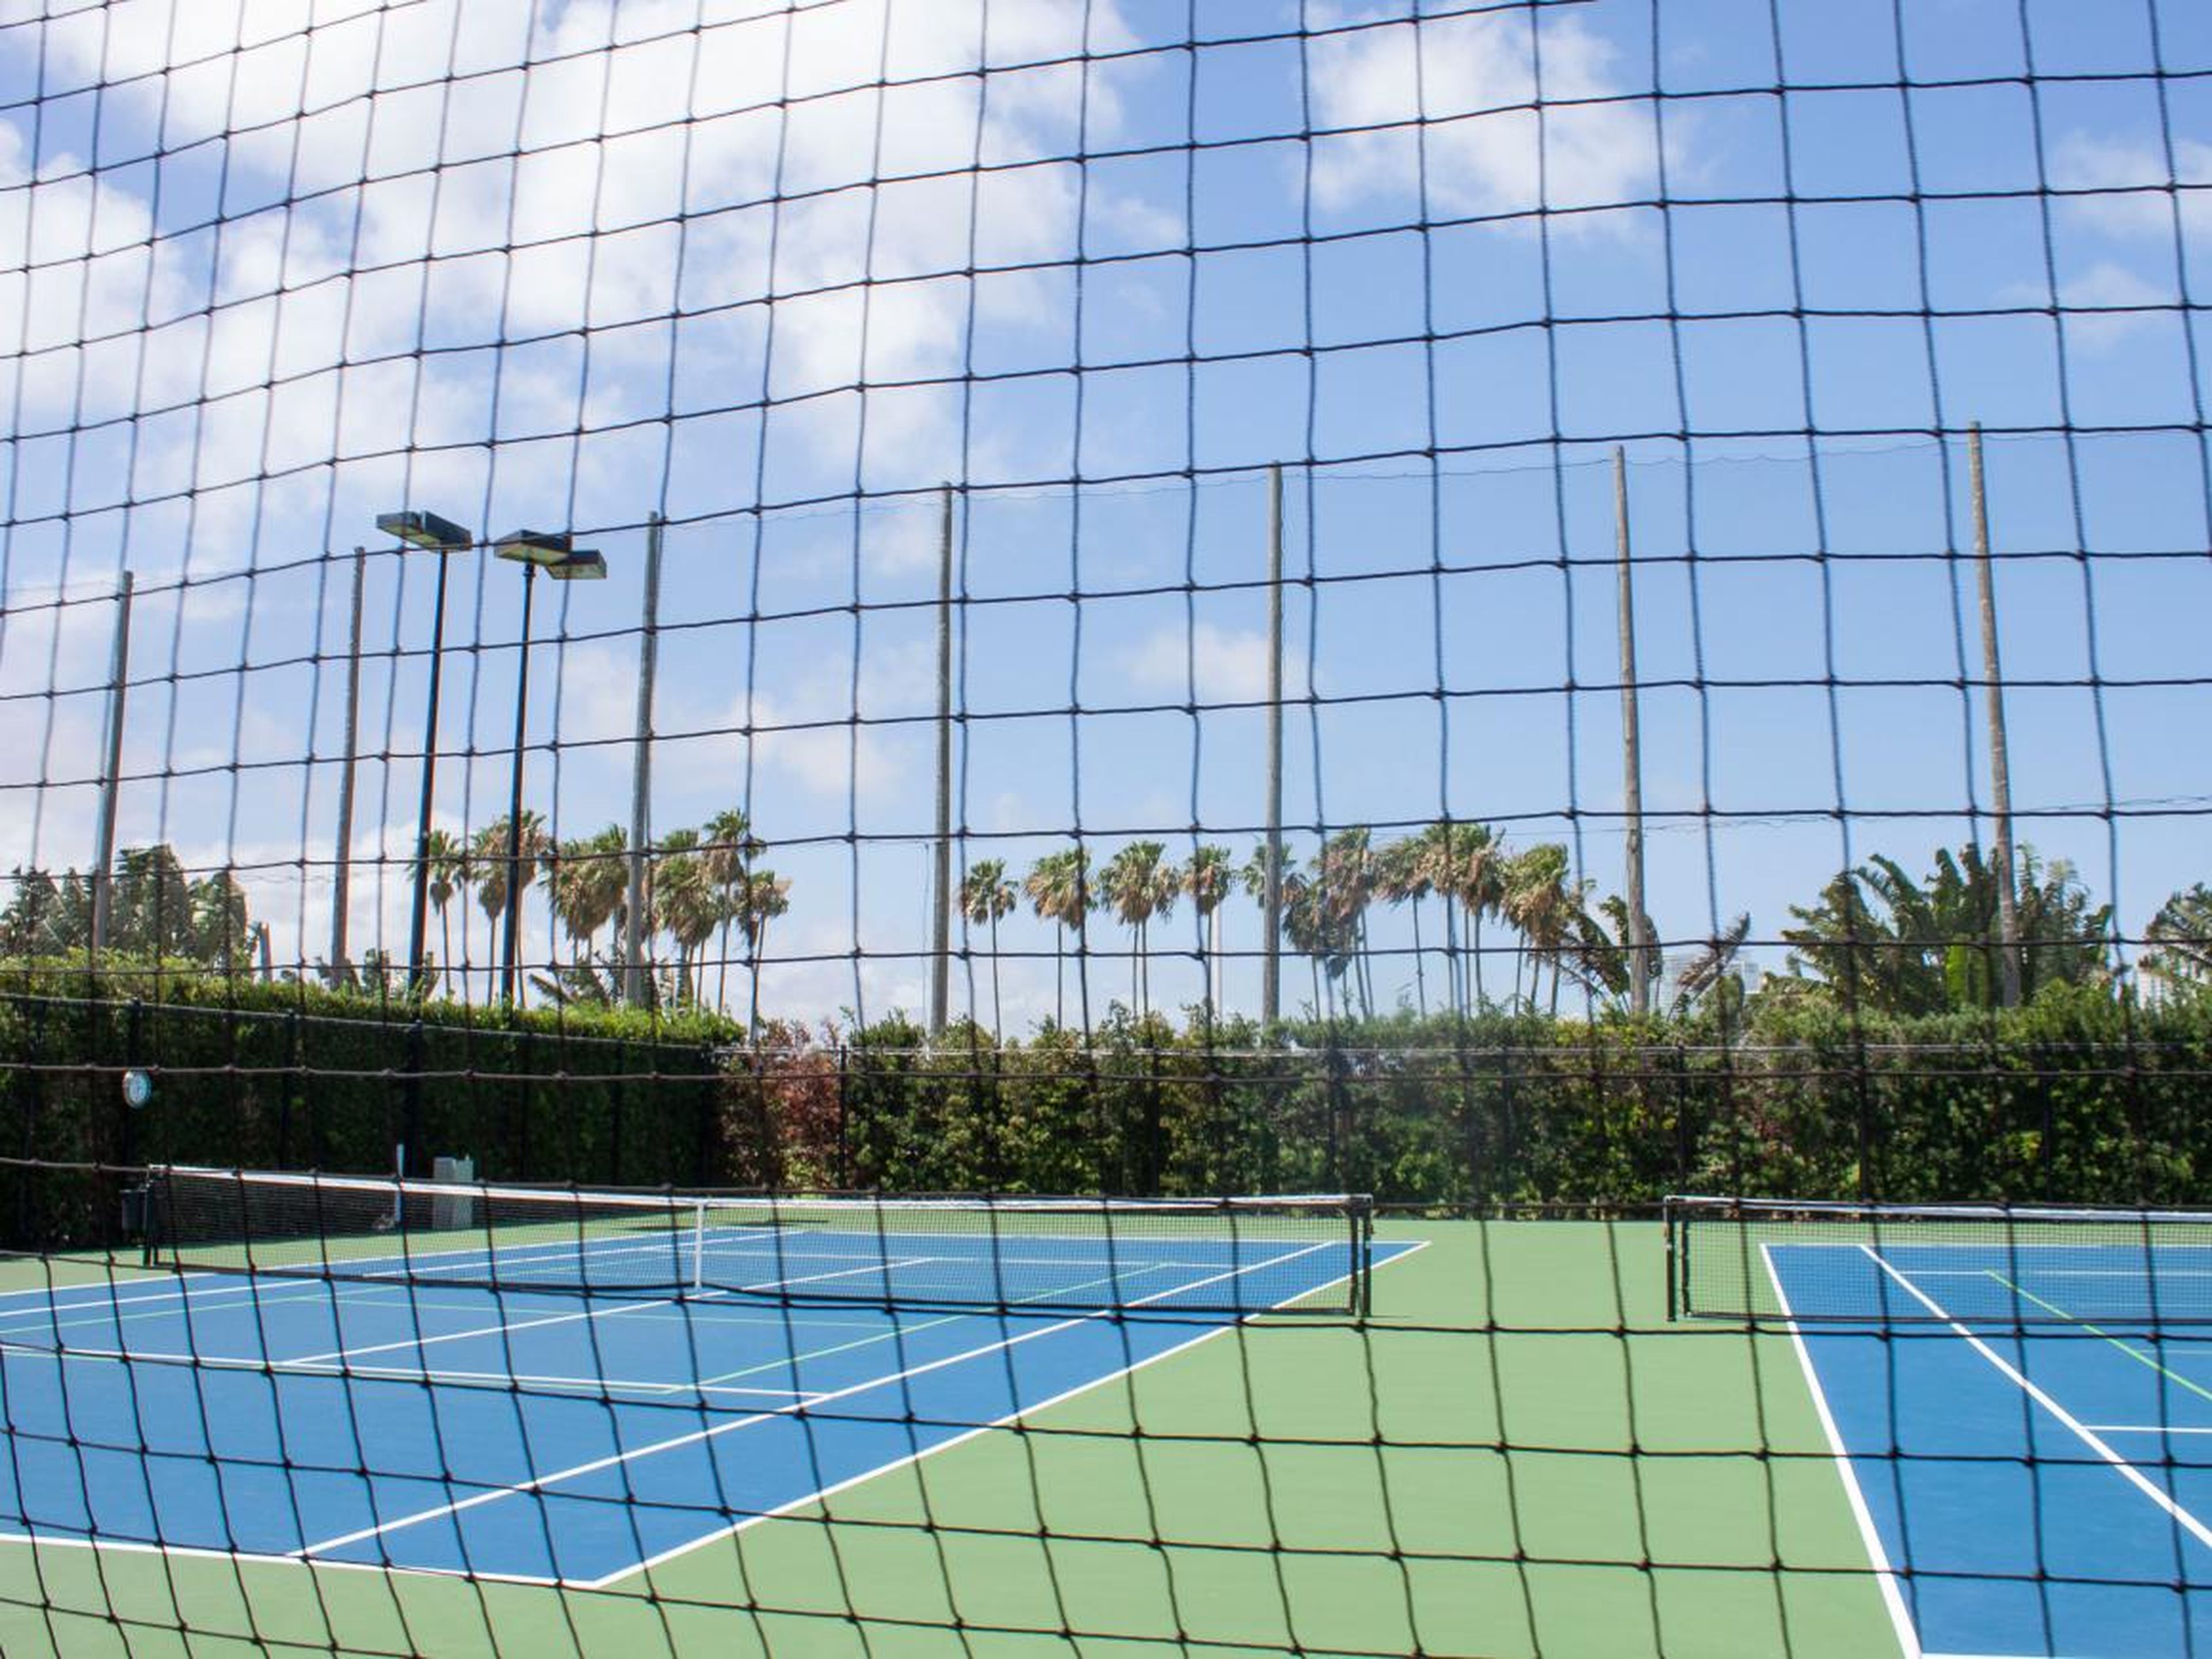 Fisher Island's professional tennis courts have been ranked No. 1 in the East Coast region of the US by Tennis Magazine.